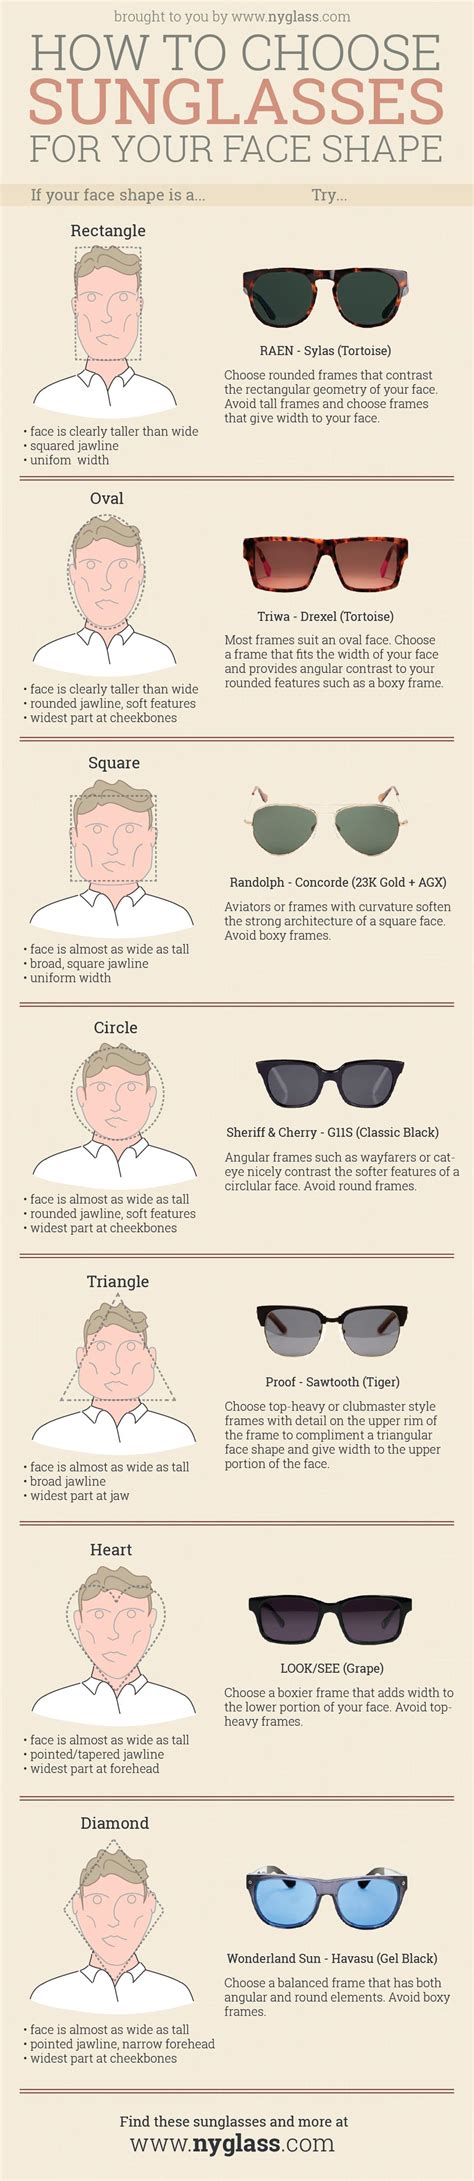 How To Choose Sunglasses For Your Face Shape Guide For Both Men And Women New York Glass